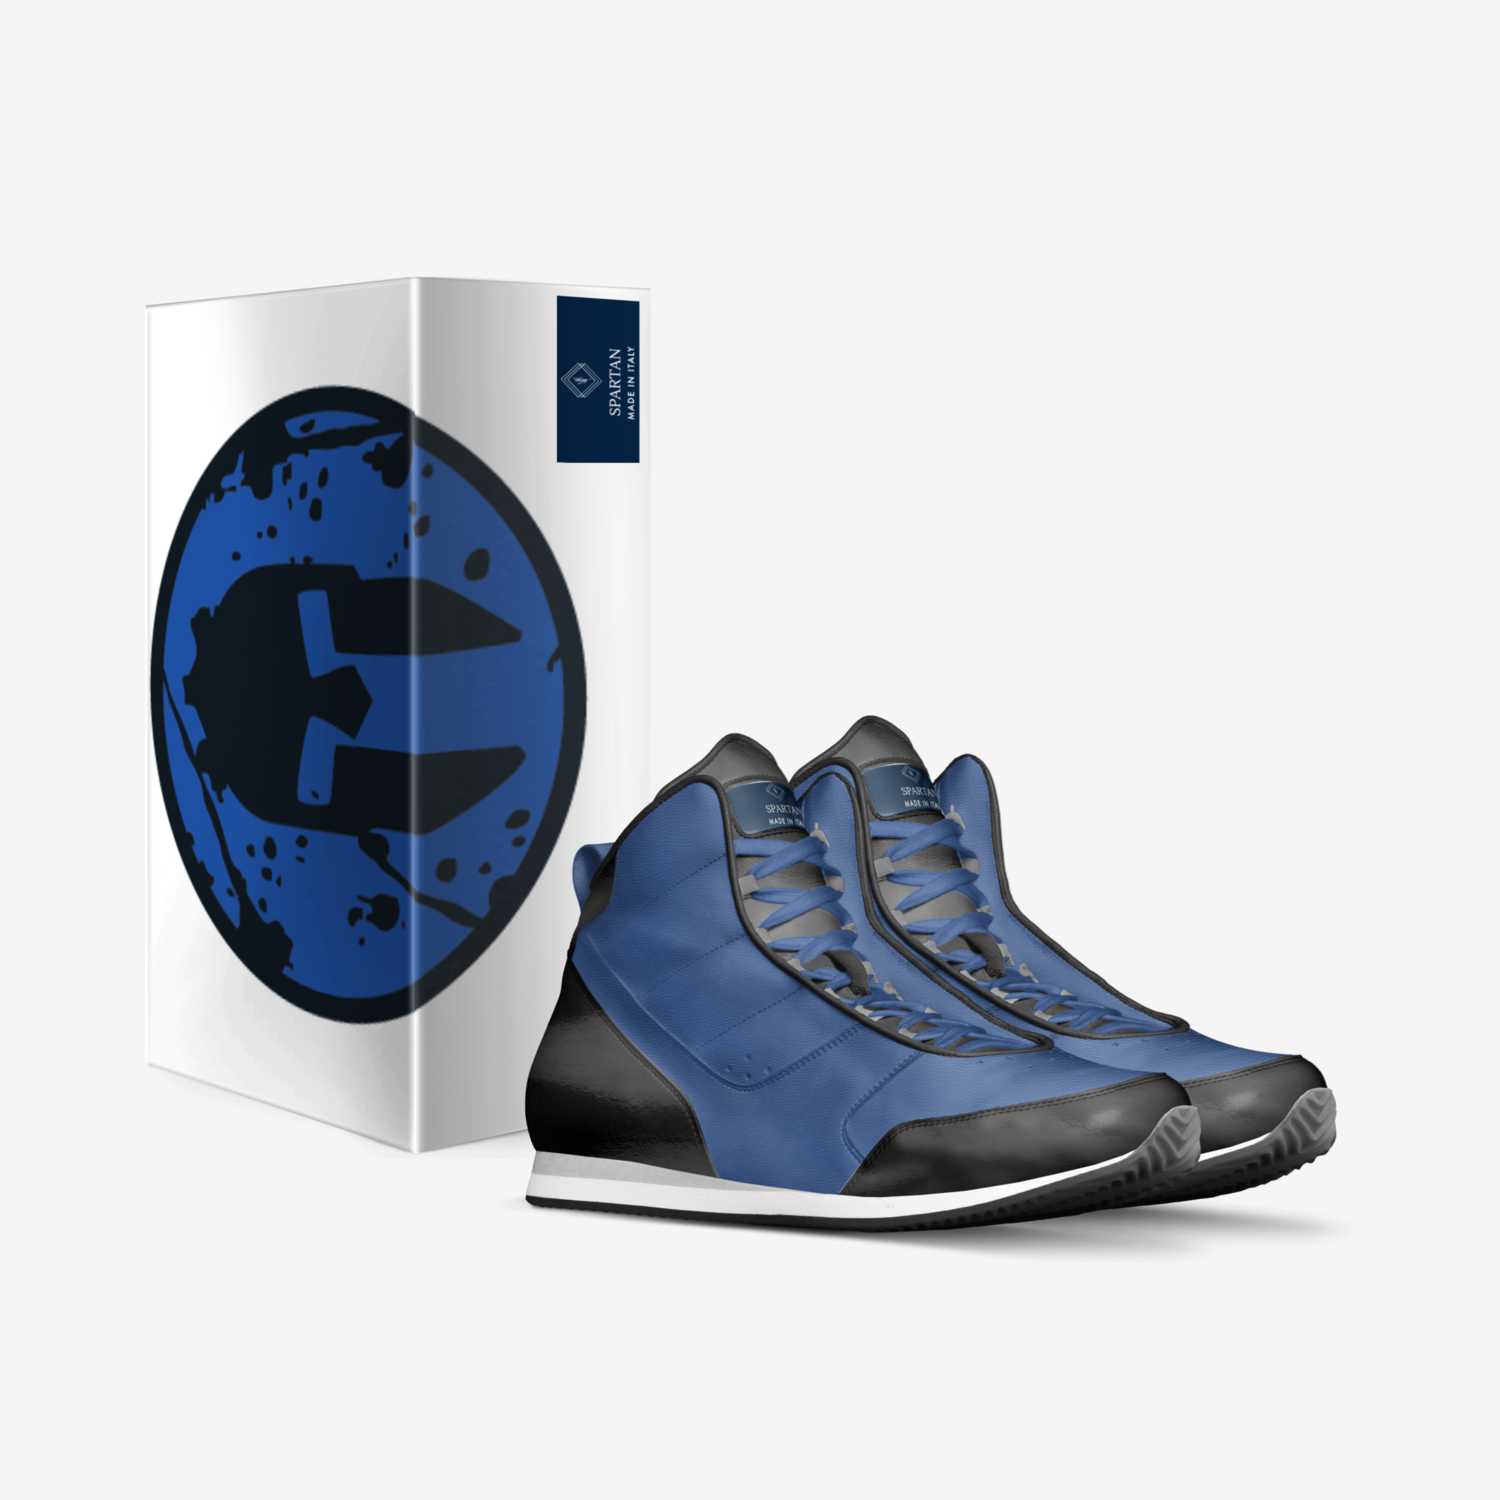 SPARTAN custom made in Italy shoes by Nora Elrayes | Box view